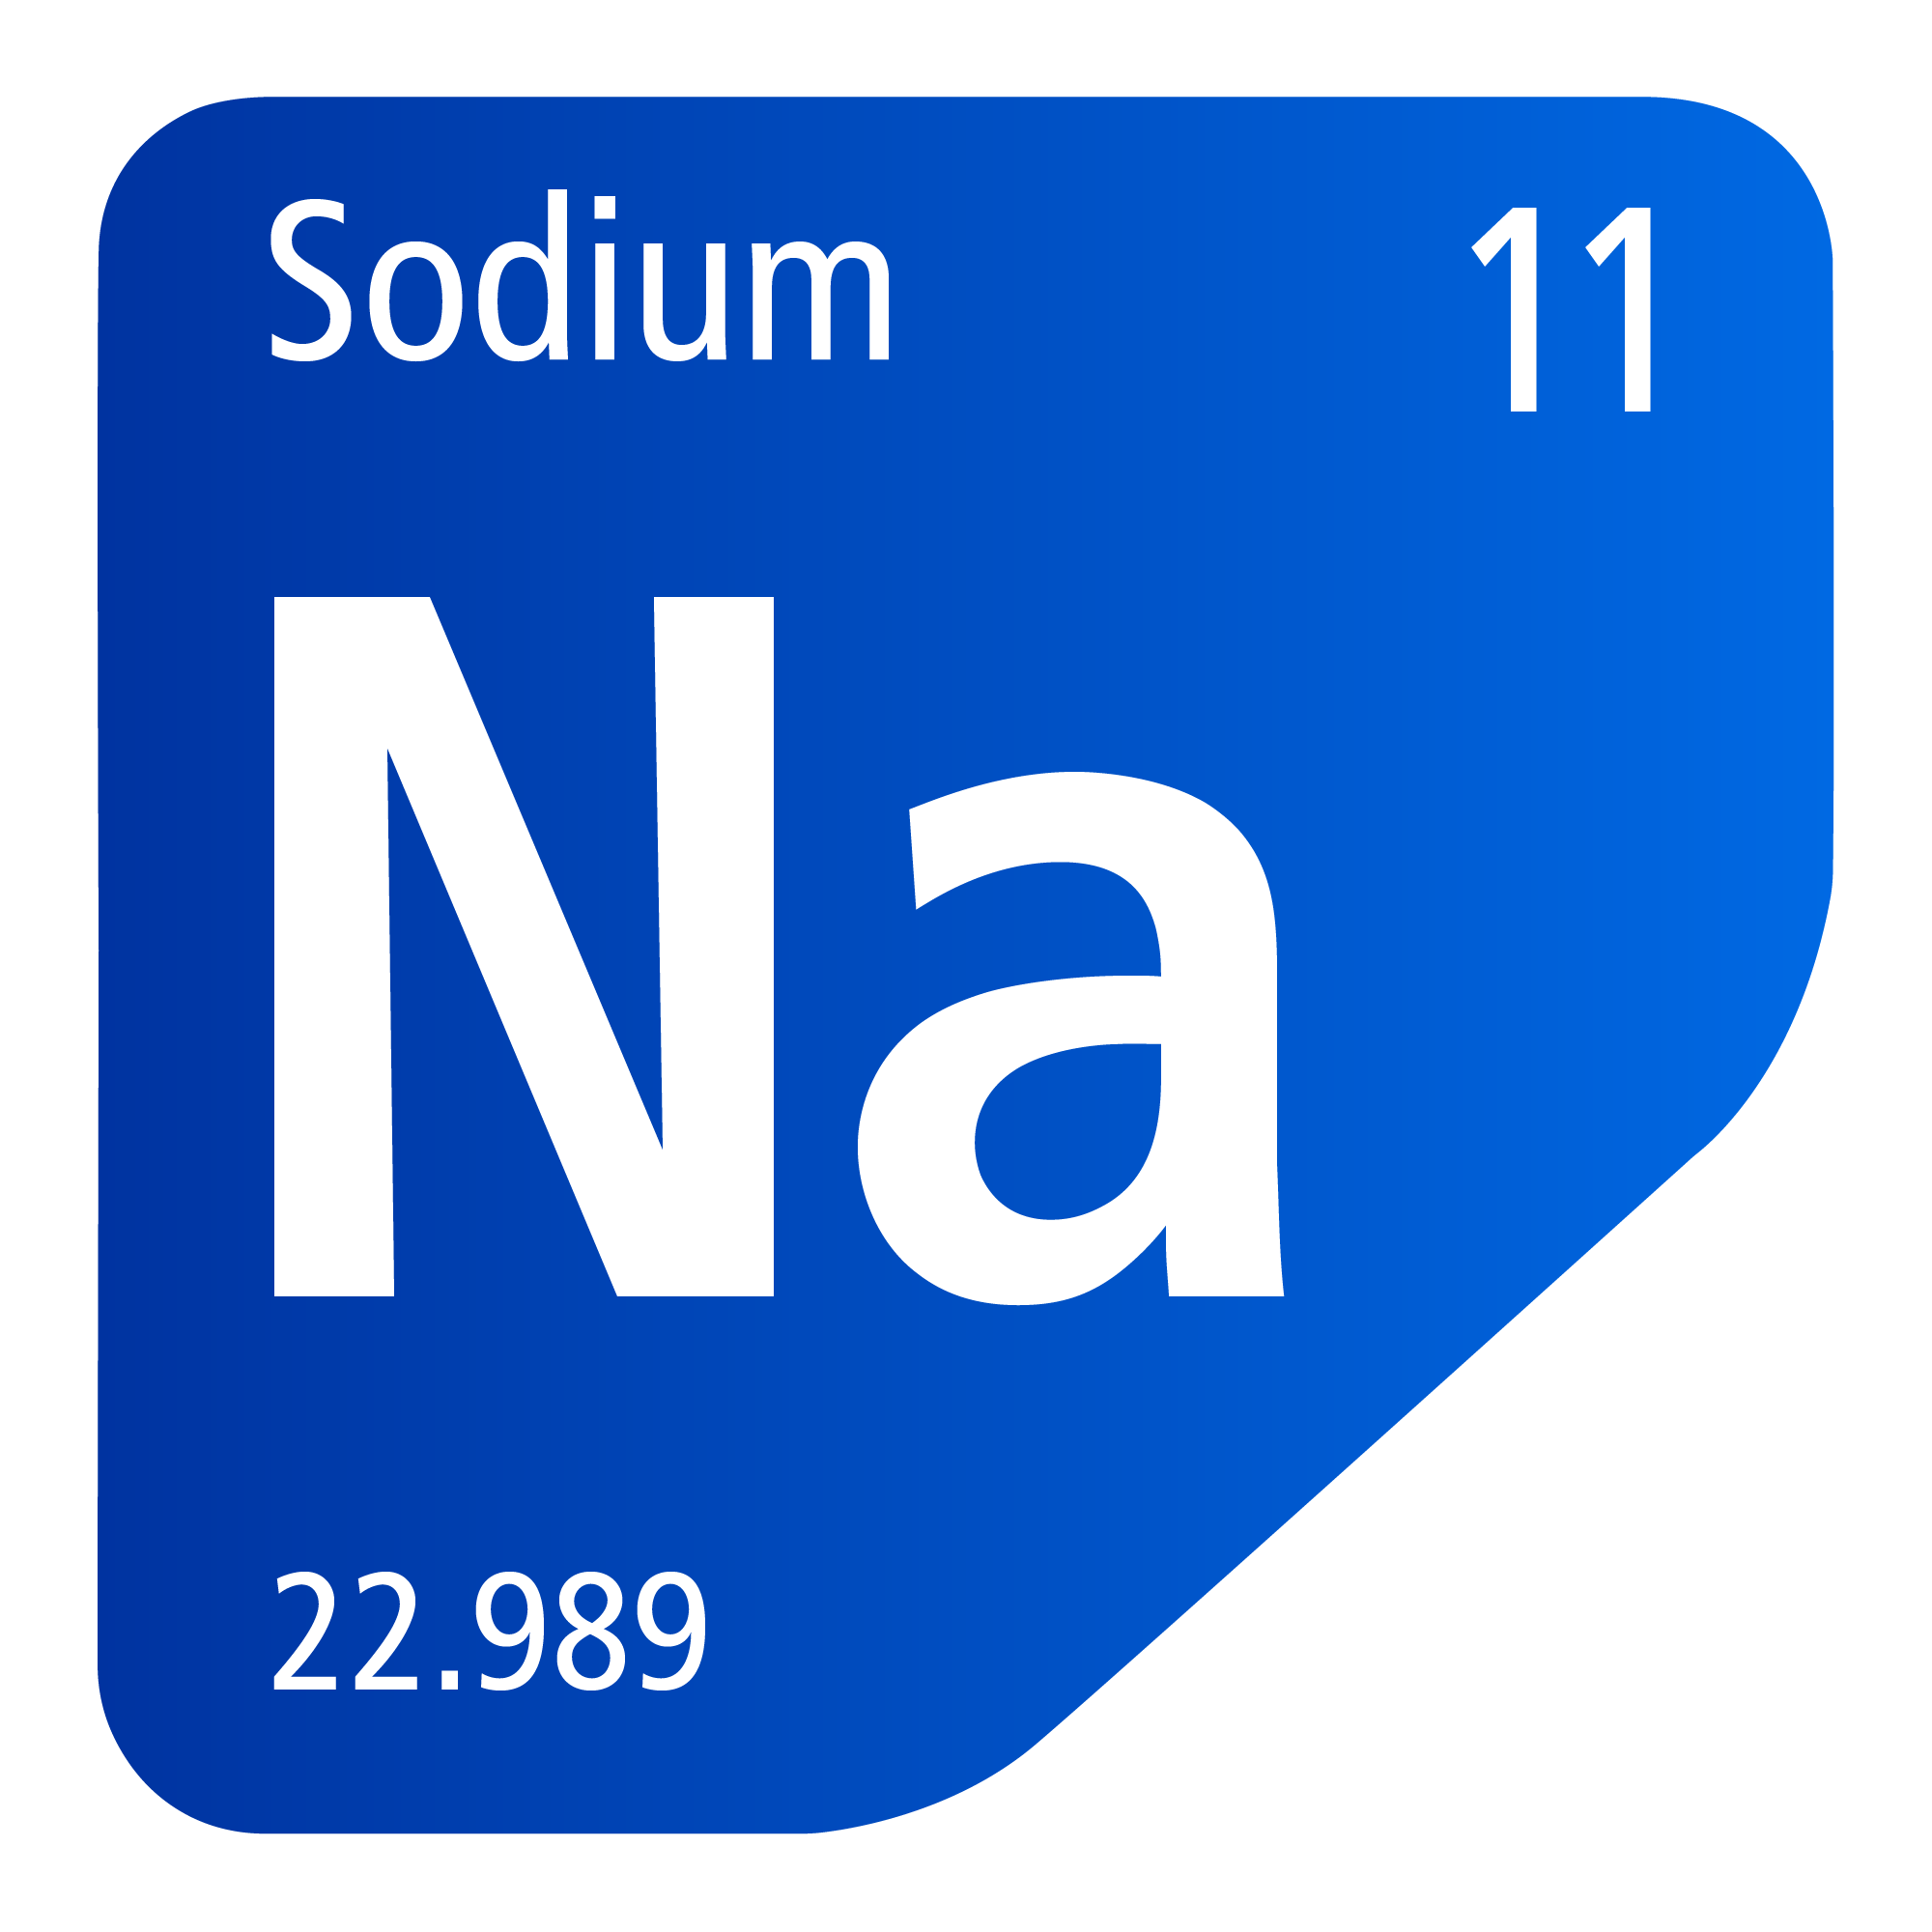 List of Behansar products in Sodium category